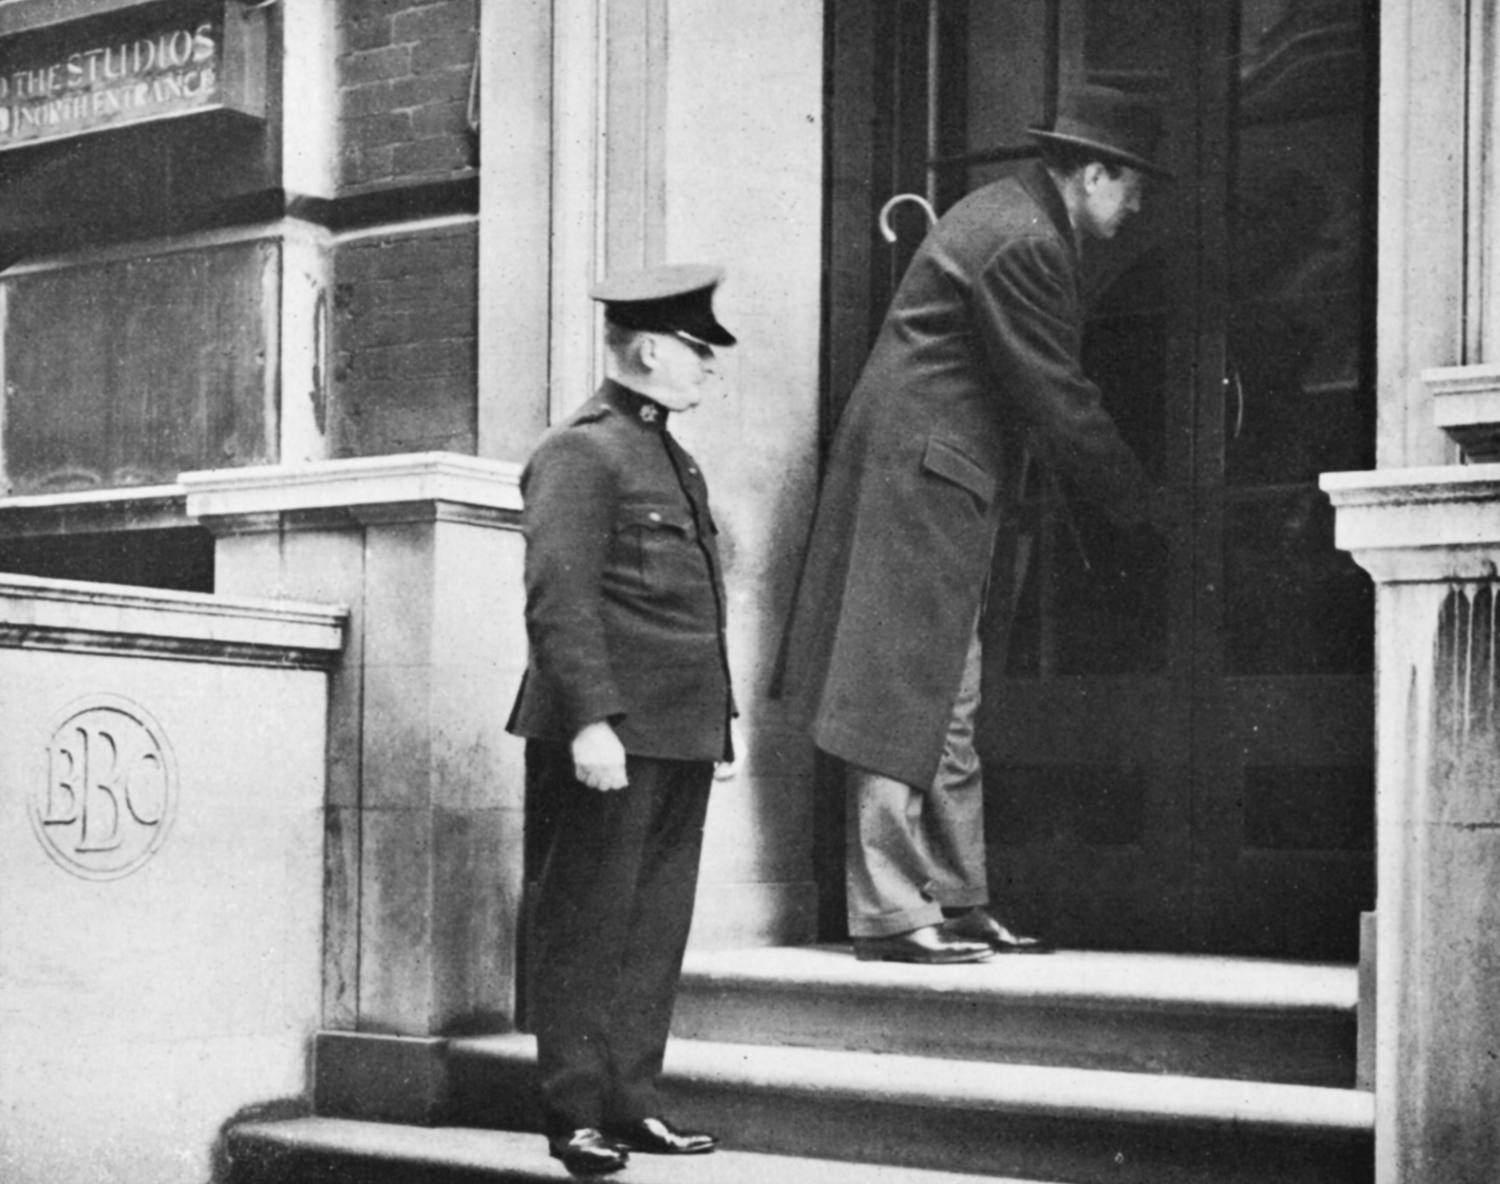 A commissionaire watches a man lock a big door